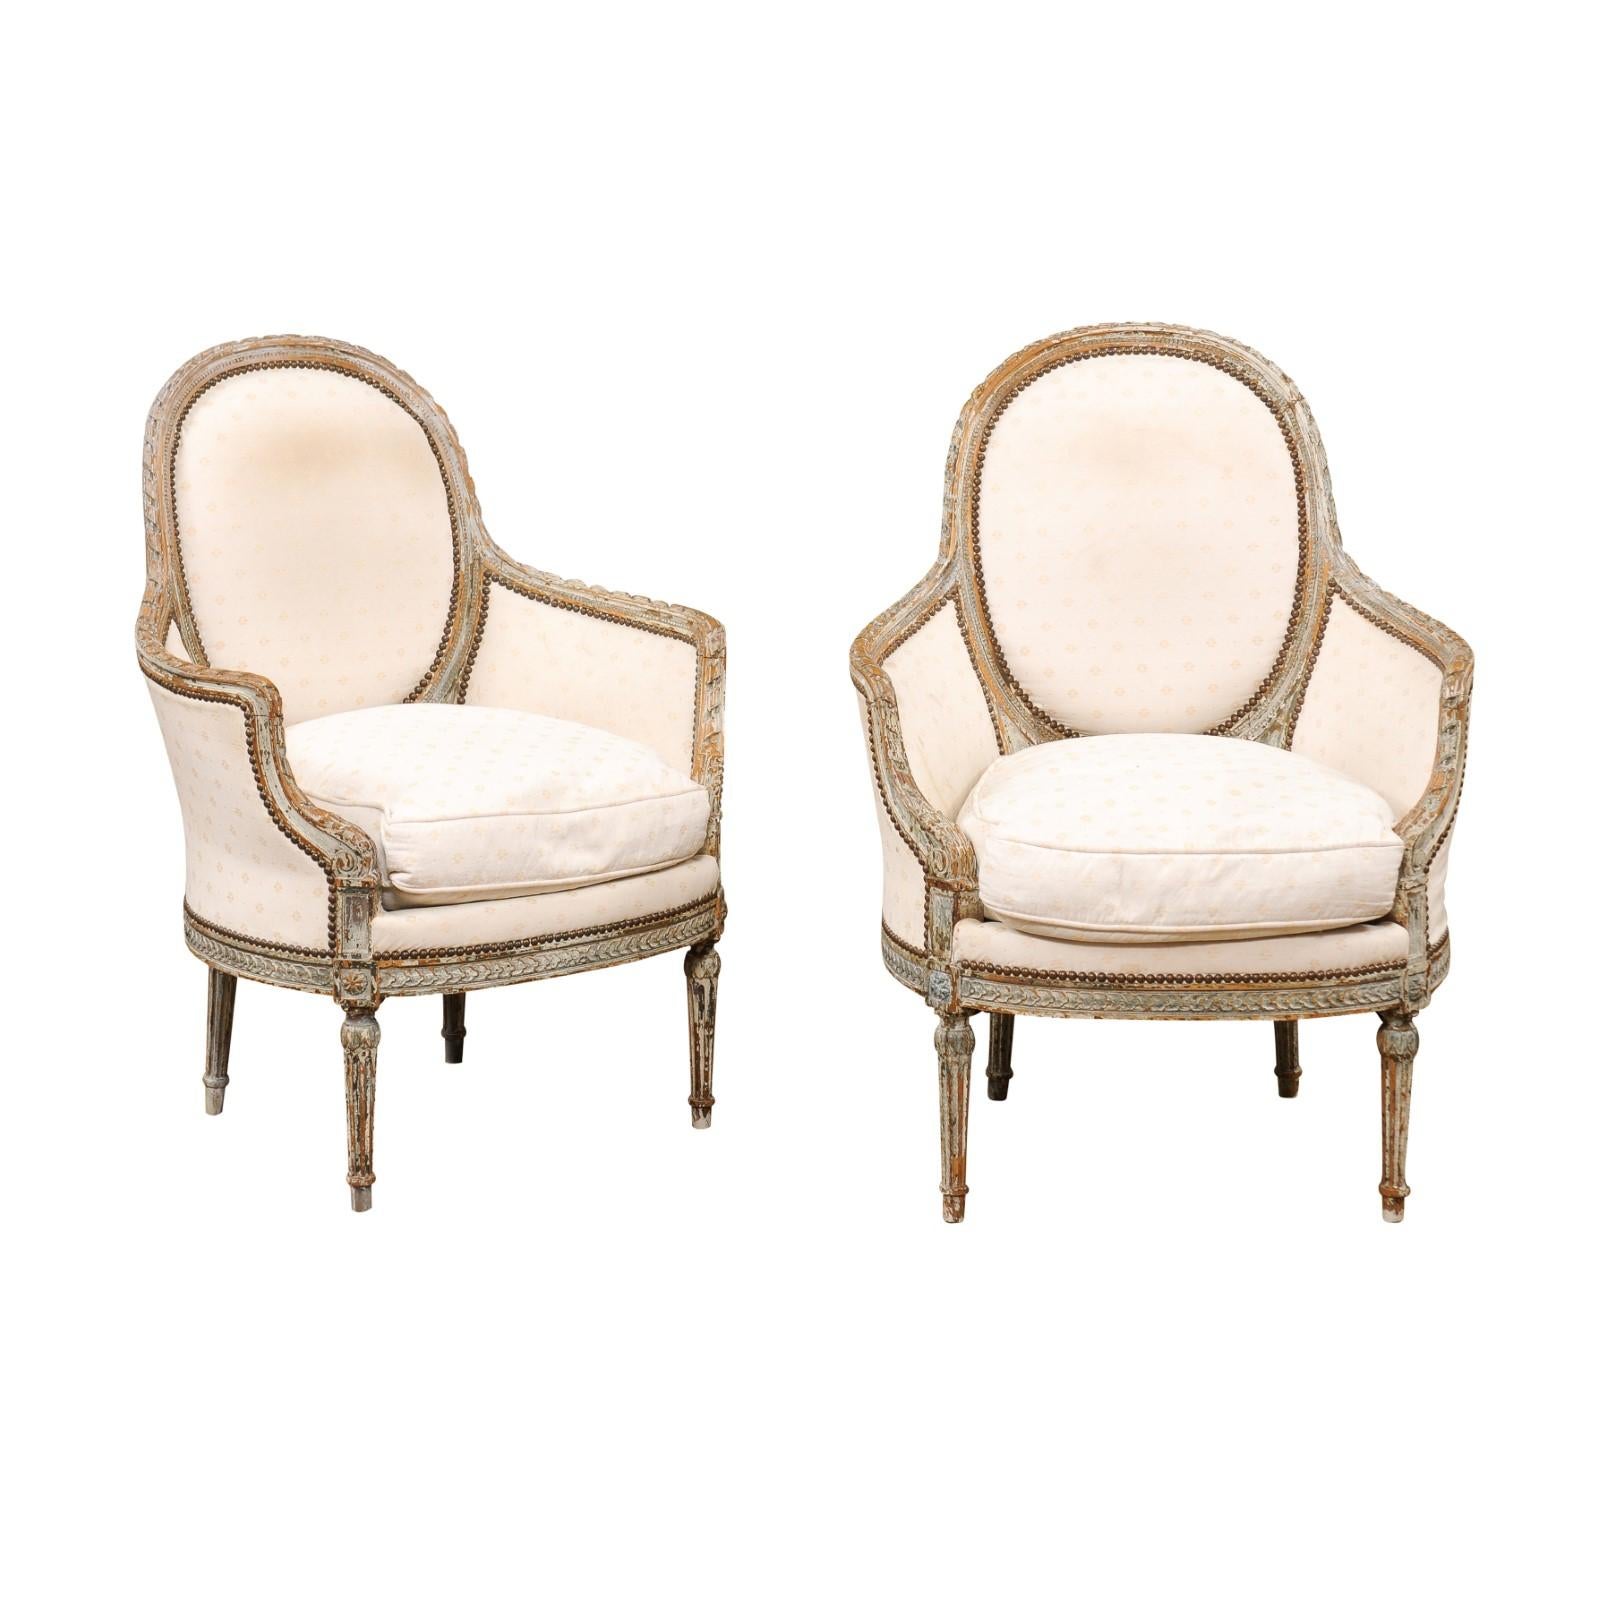 A pair of French Louis XVI style painted wood bergère chairs from the mid 19th century, with oval backs, carved twisted ribbon motifs, fluted legs, and distressed patina. Created in France at the beginning of Emperor Napoléon III's reign in the